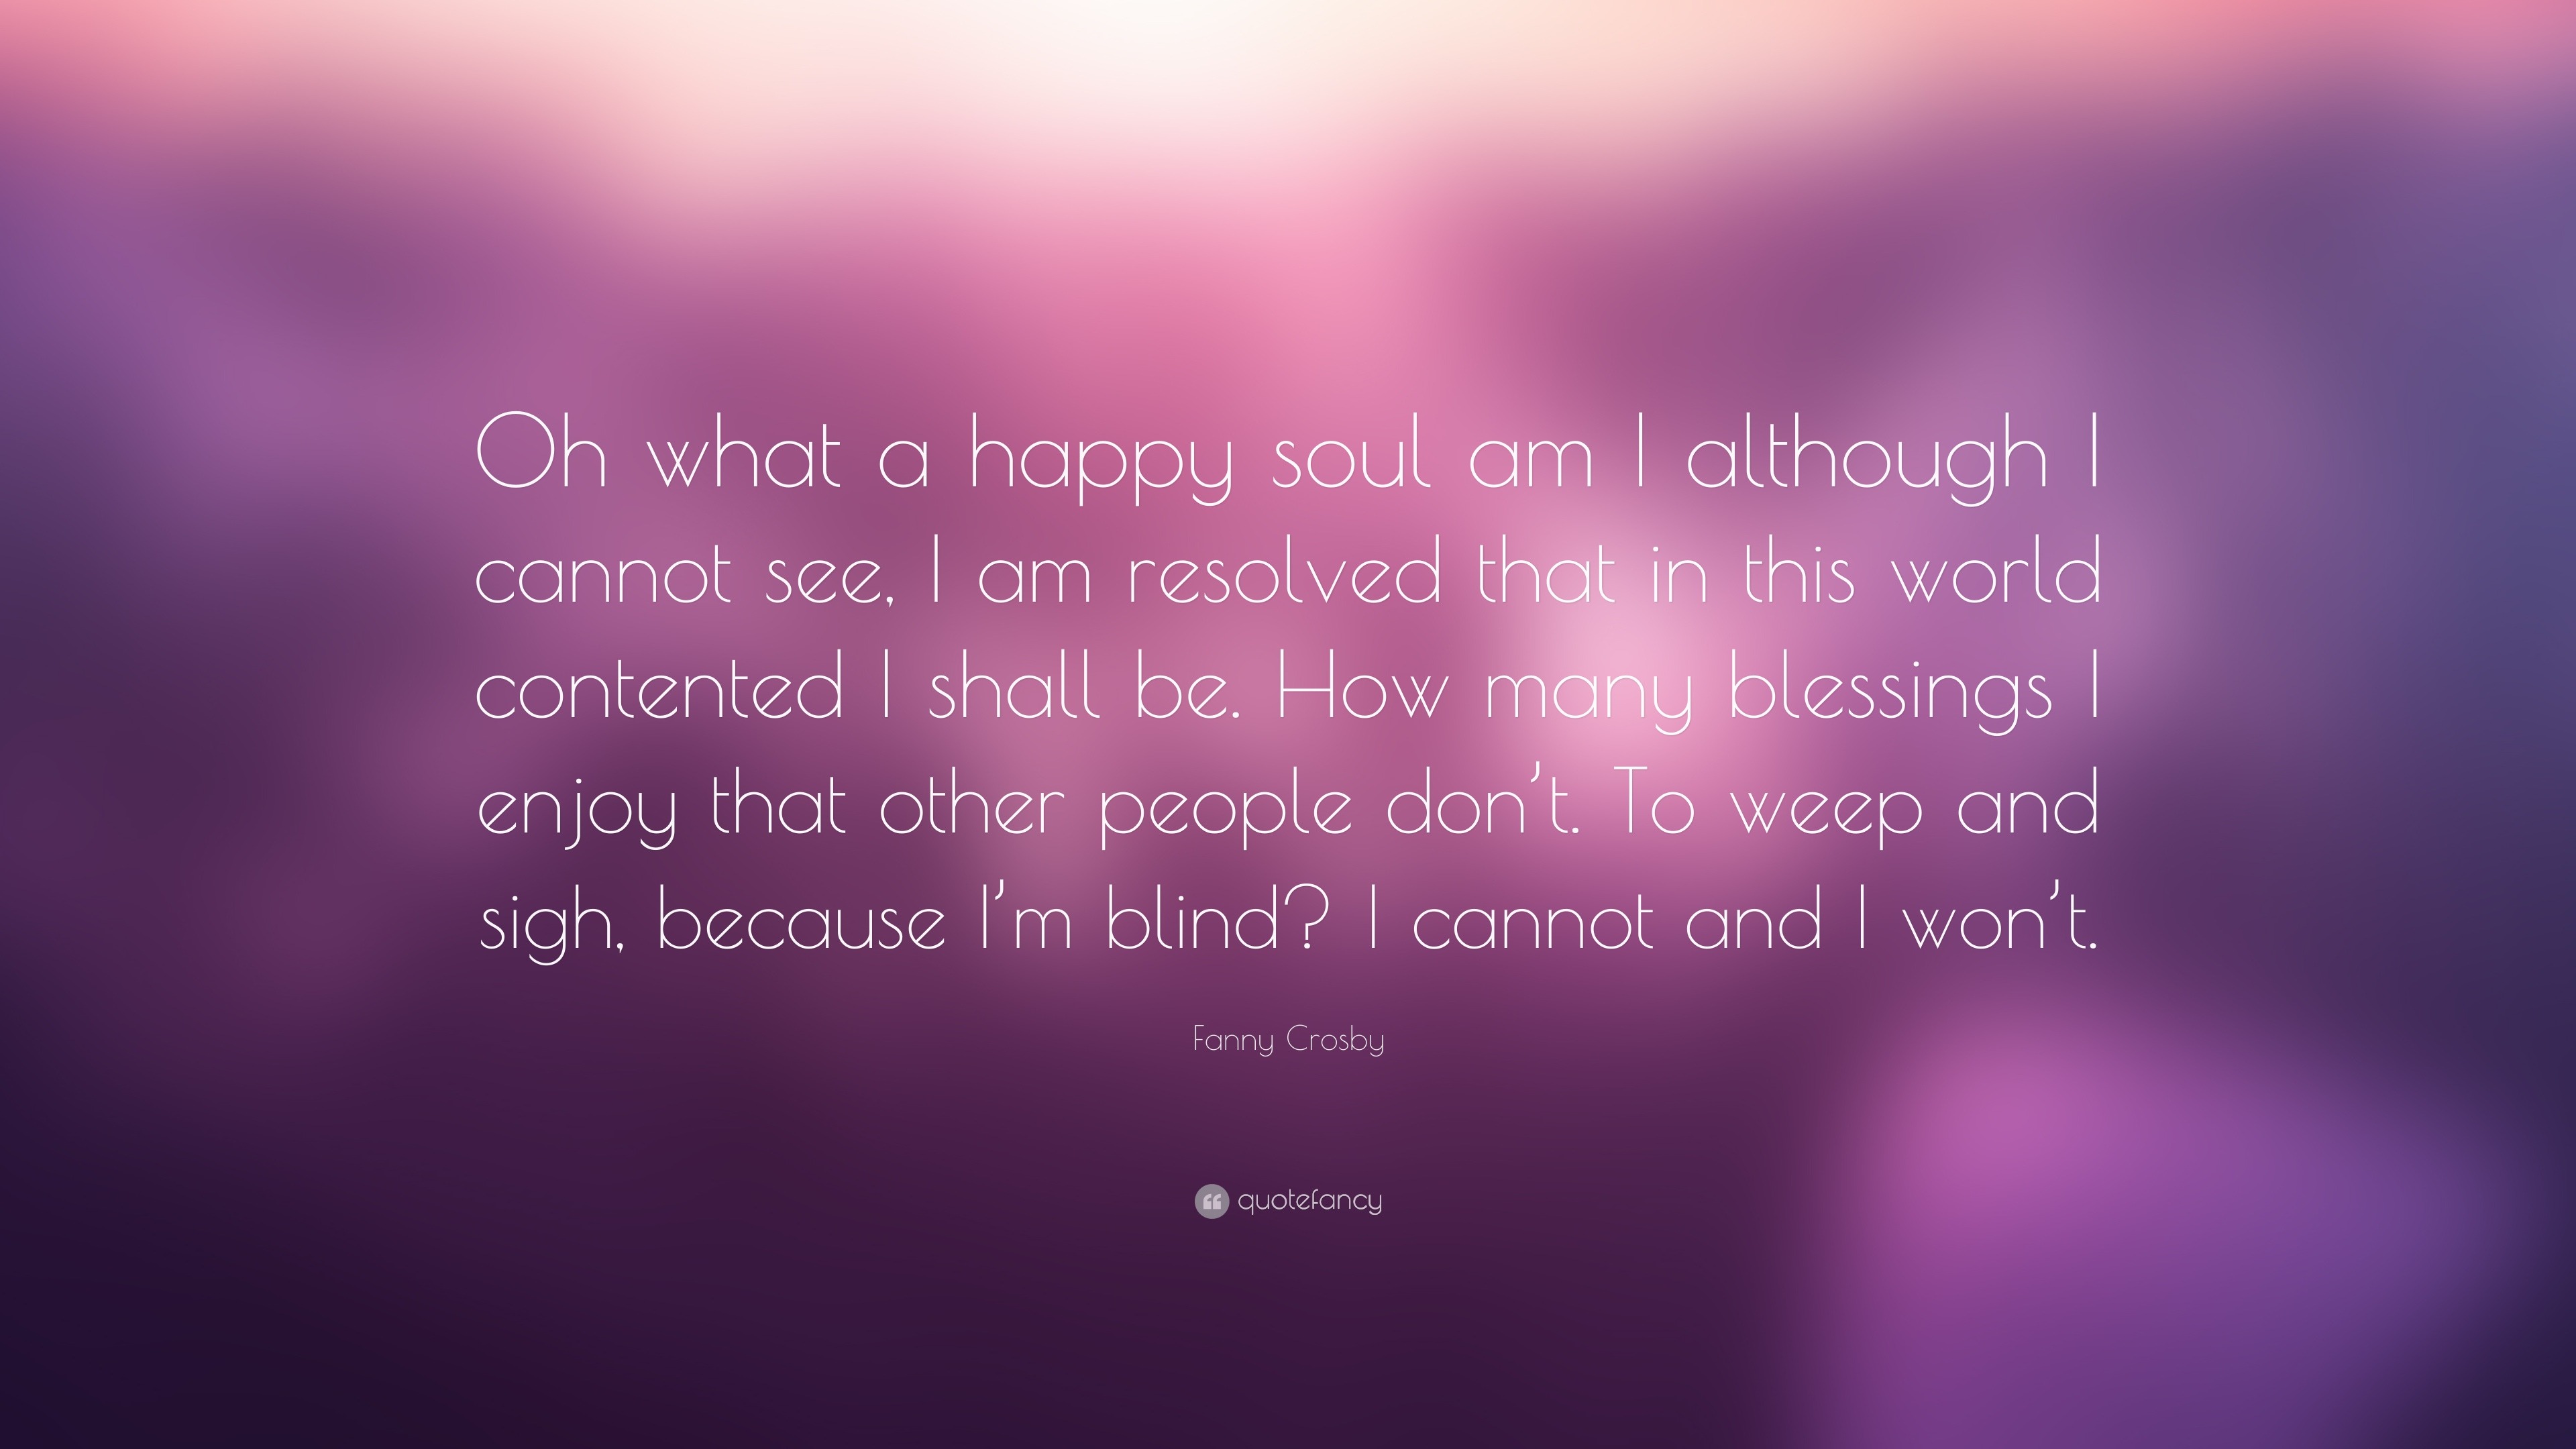 Fanny Crosby Quote: “Oh what a happy soul am I although I cannot see, I ...